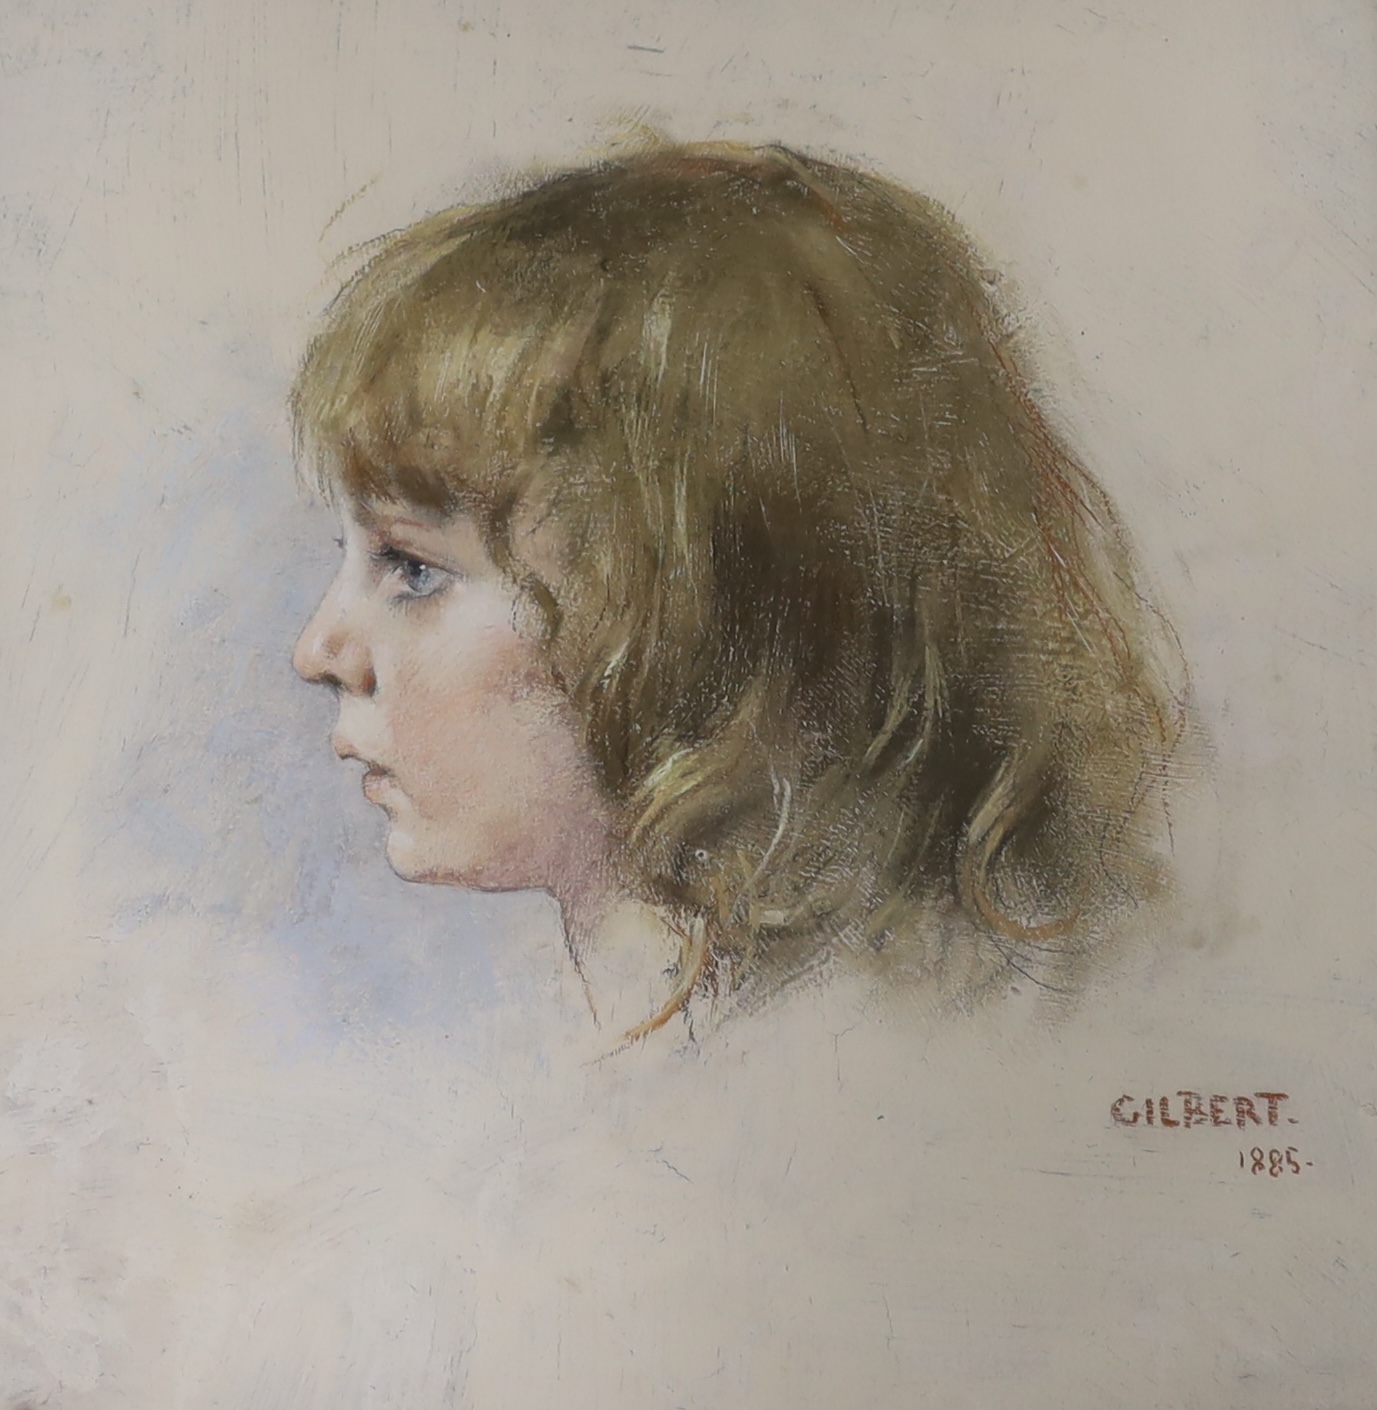 Rene Joseph Gilbert (French, 1857-1914), pastel and oil on board, Head study of a young girl, signed and dated 1885, ER632 stencil verso, 37 x 35cm, ornate gilt framed